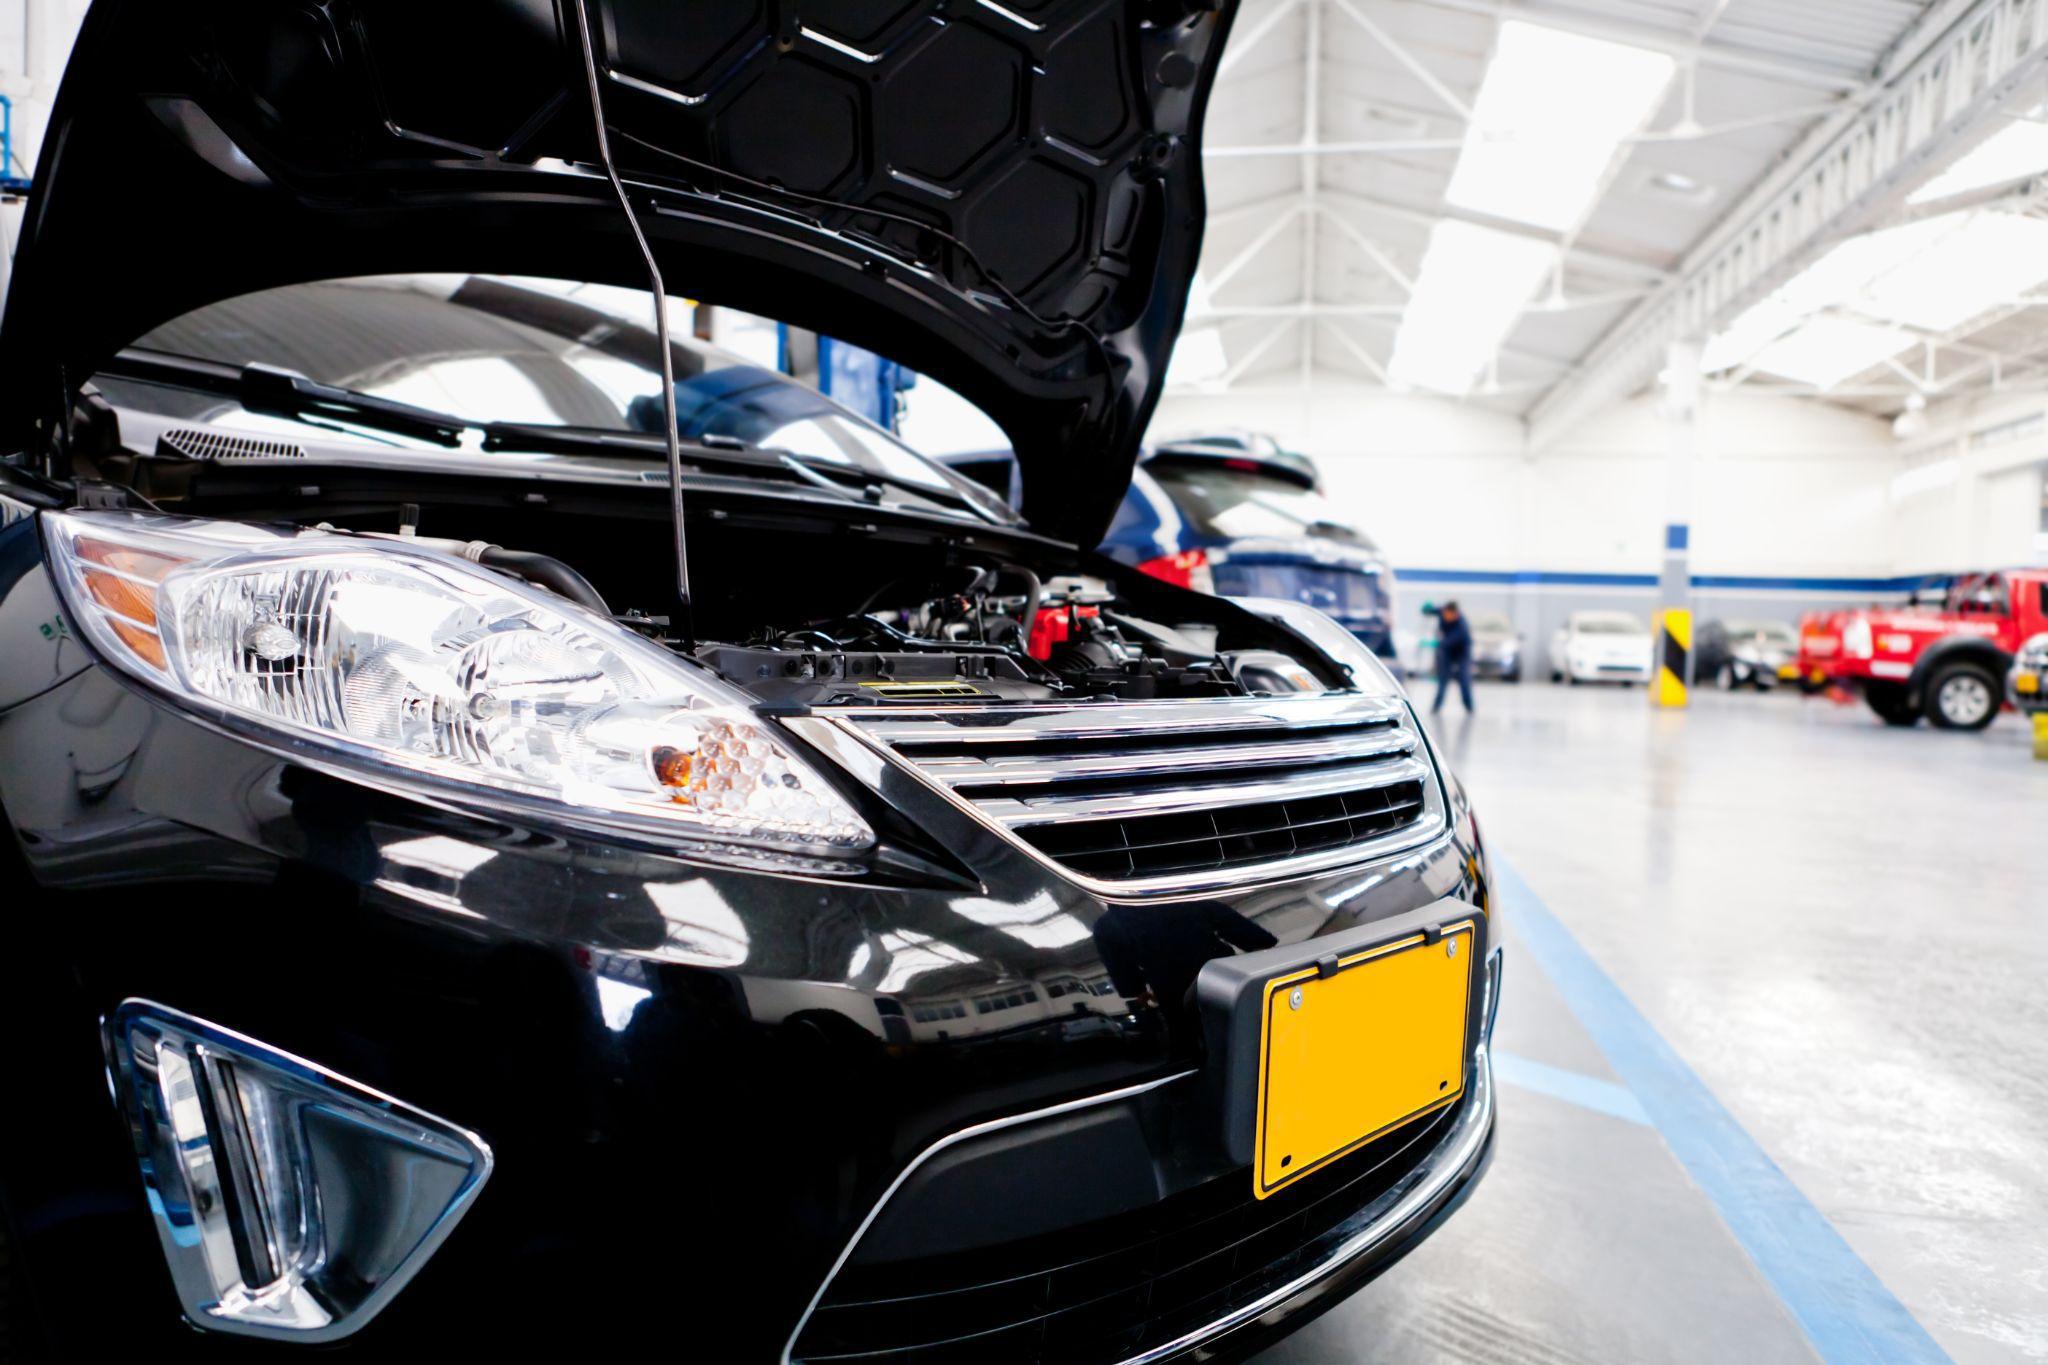 Important Maintenance Tasks to Reduce the Risk of Serious Engine Trouble